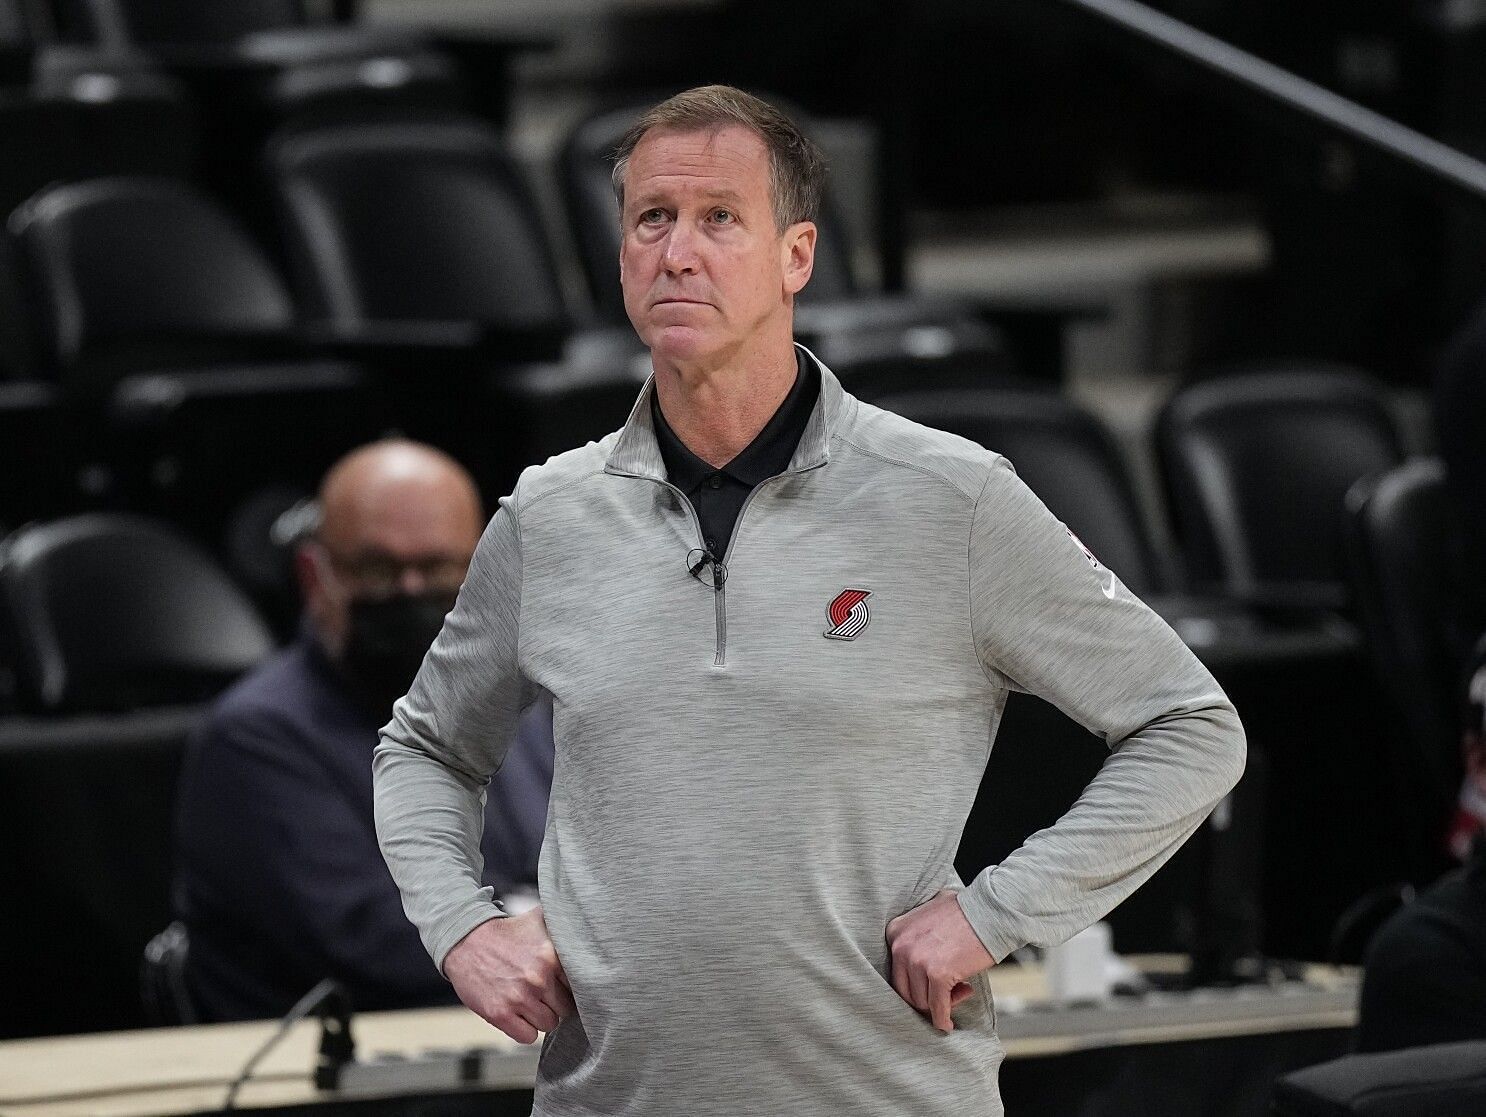 Terry Stotts man-management skills will be severley put to the test if he&#039;s hired by the LA Lakers. [Photo: Los Angeles Times]